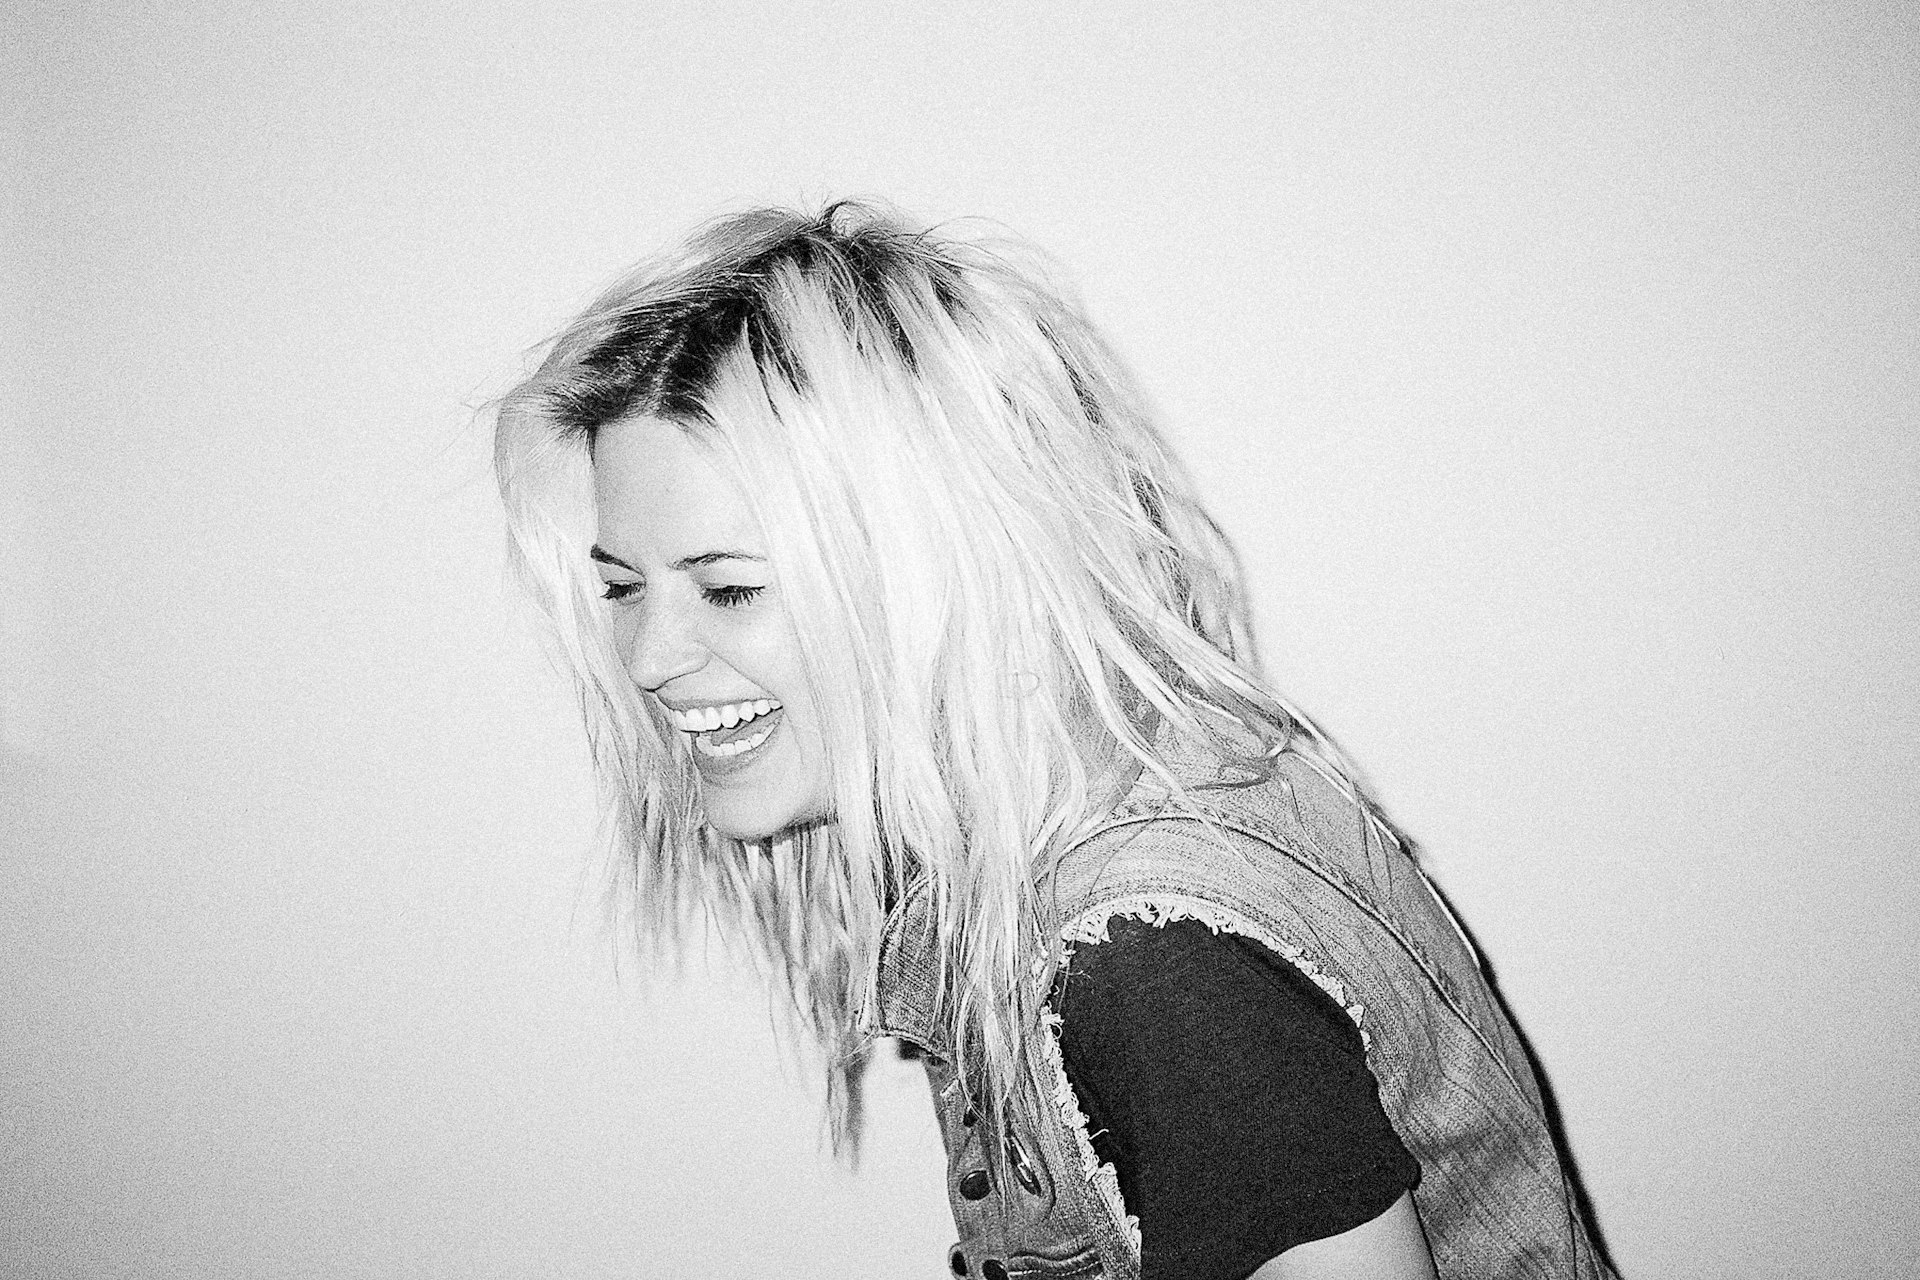 Alison Mosshart on the beauty of being young and fearless